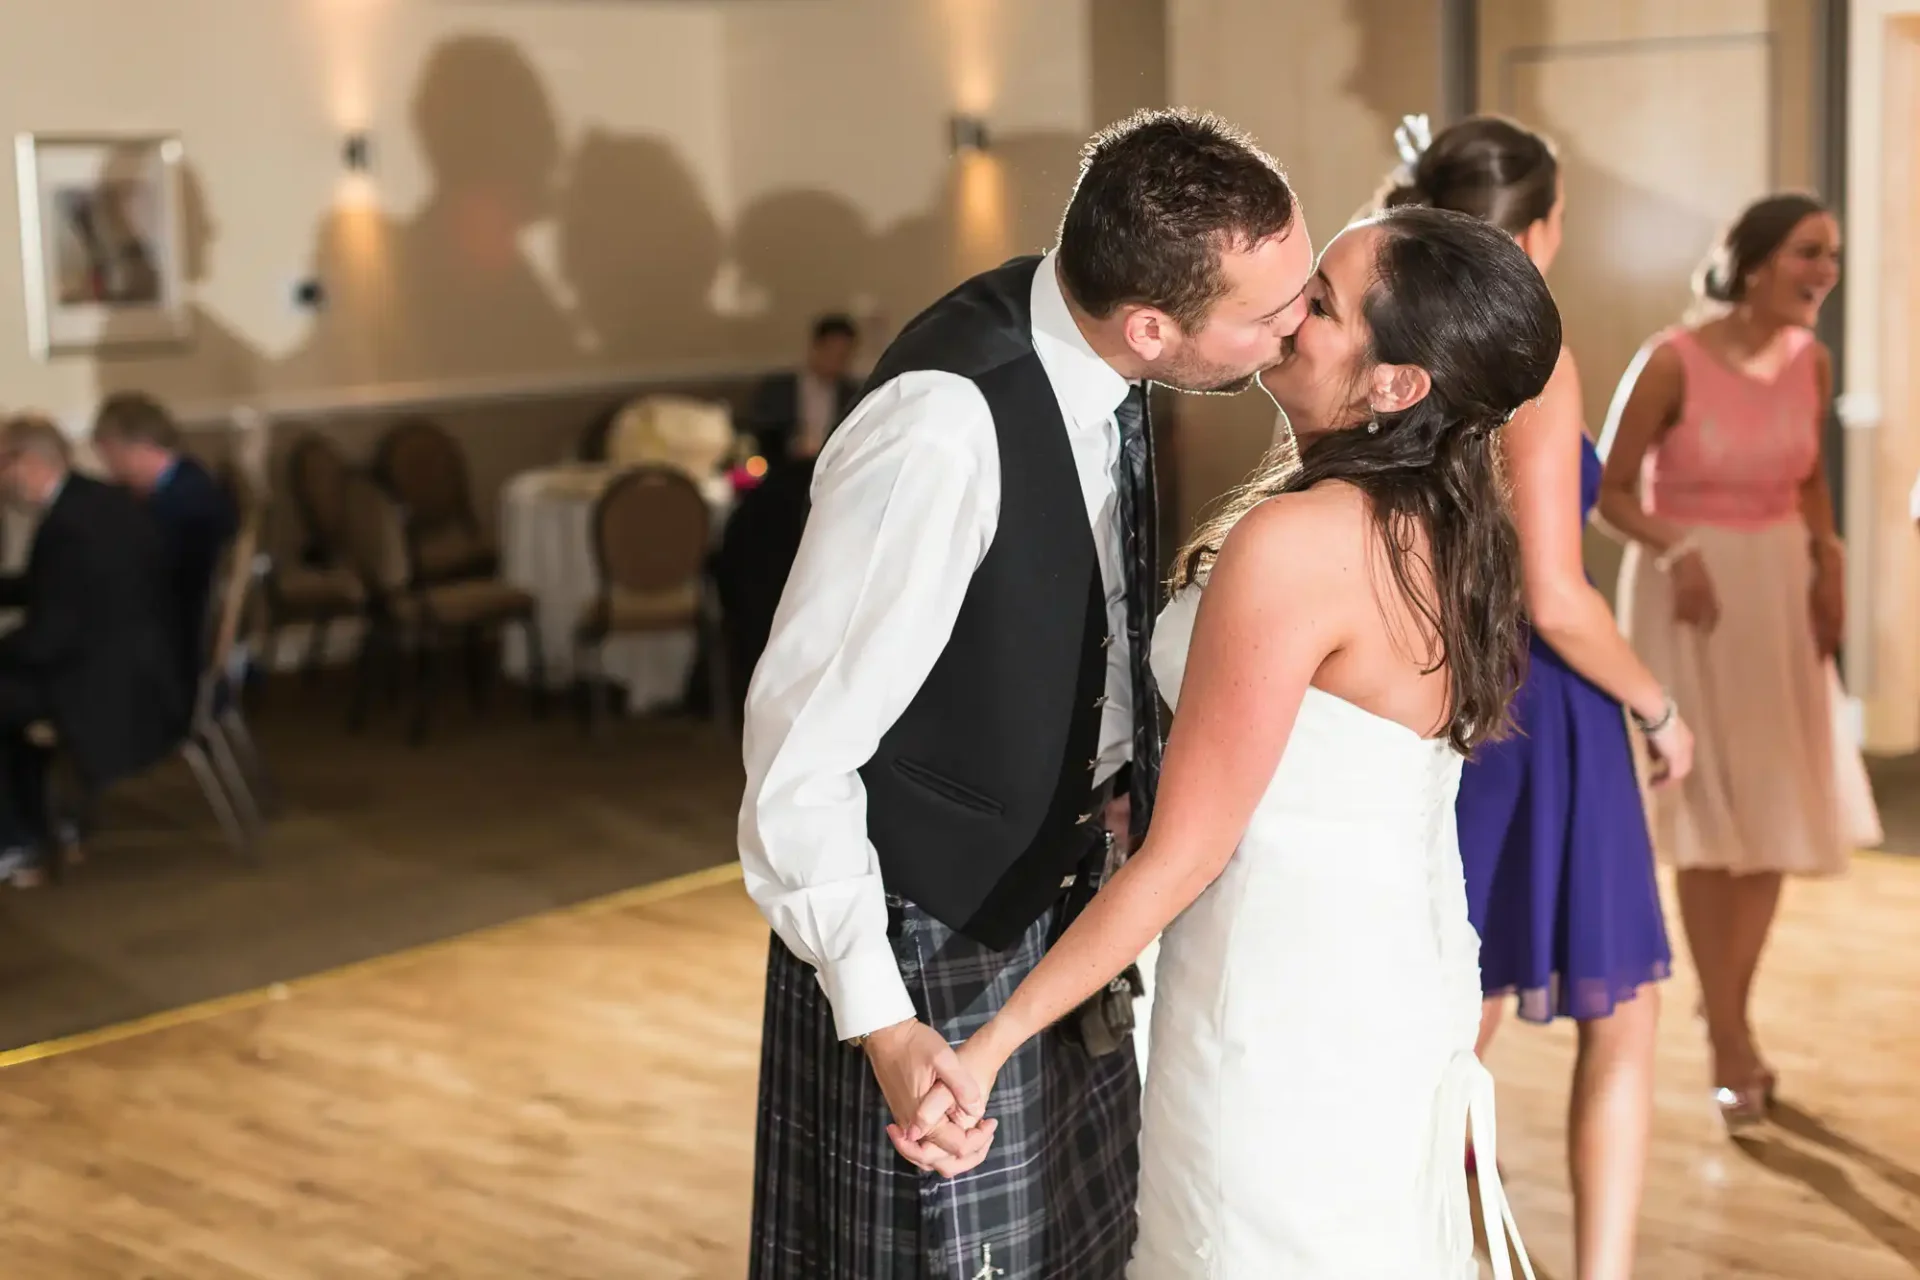 A newlywed couple kissing in a dance hall with guests in the background, groom wearing a kilt and bride in a white dress.